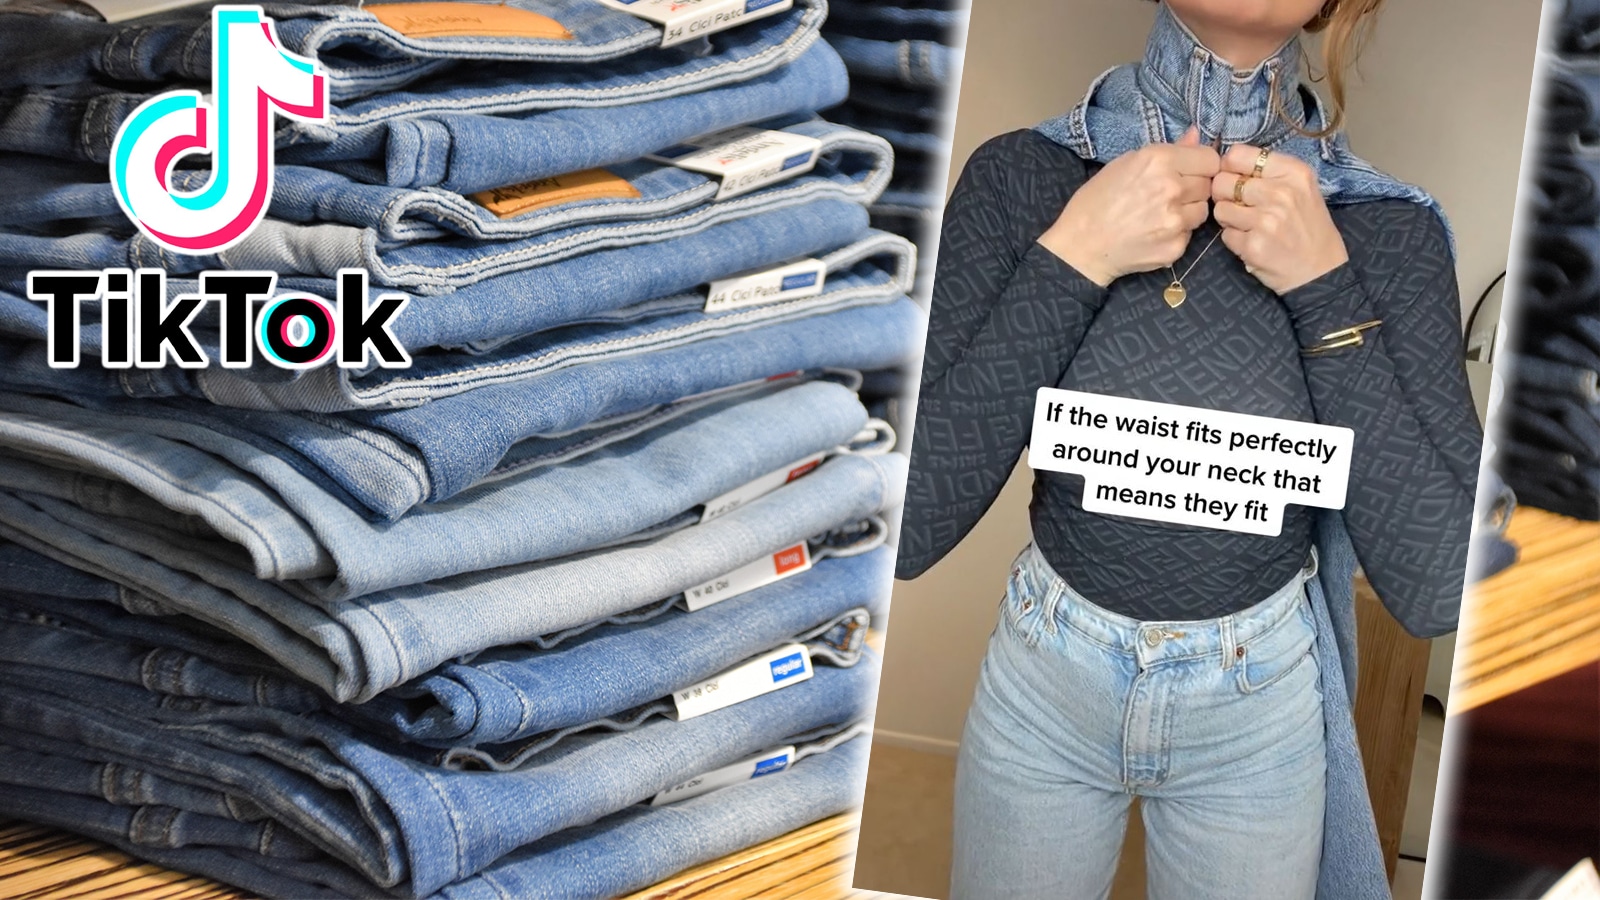 The 'game-changing' dress hack going viral on TikTok: 'Fits so much better